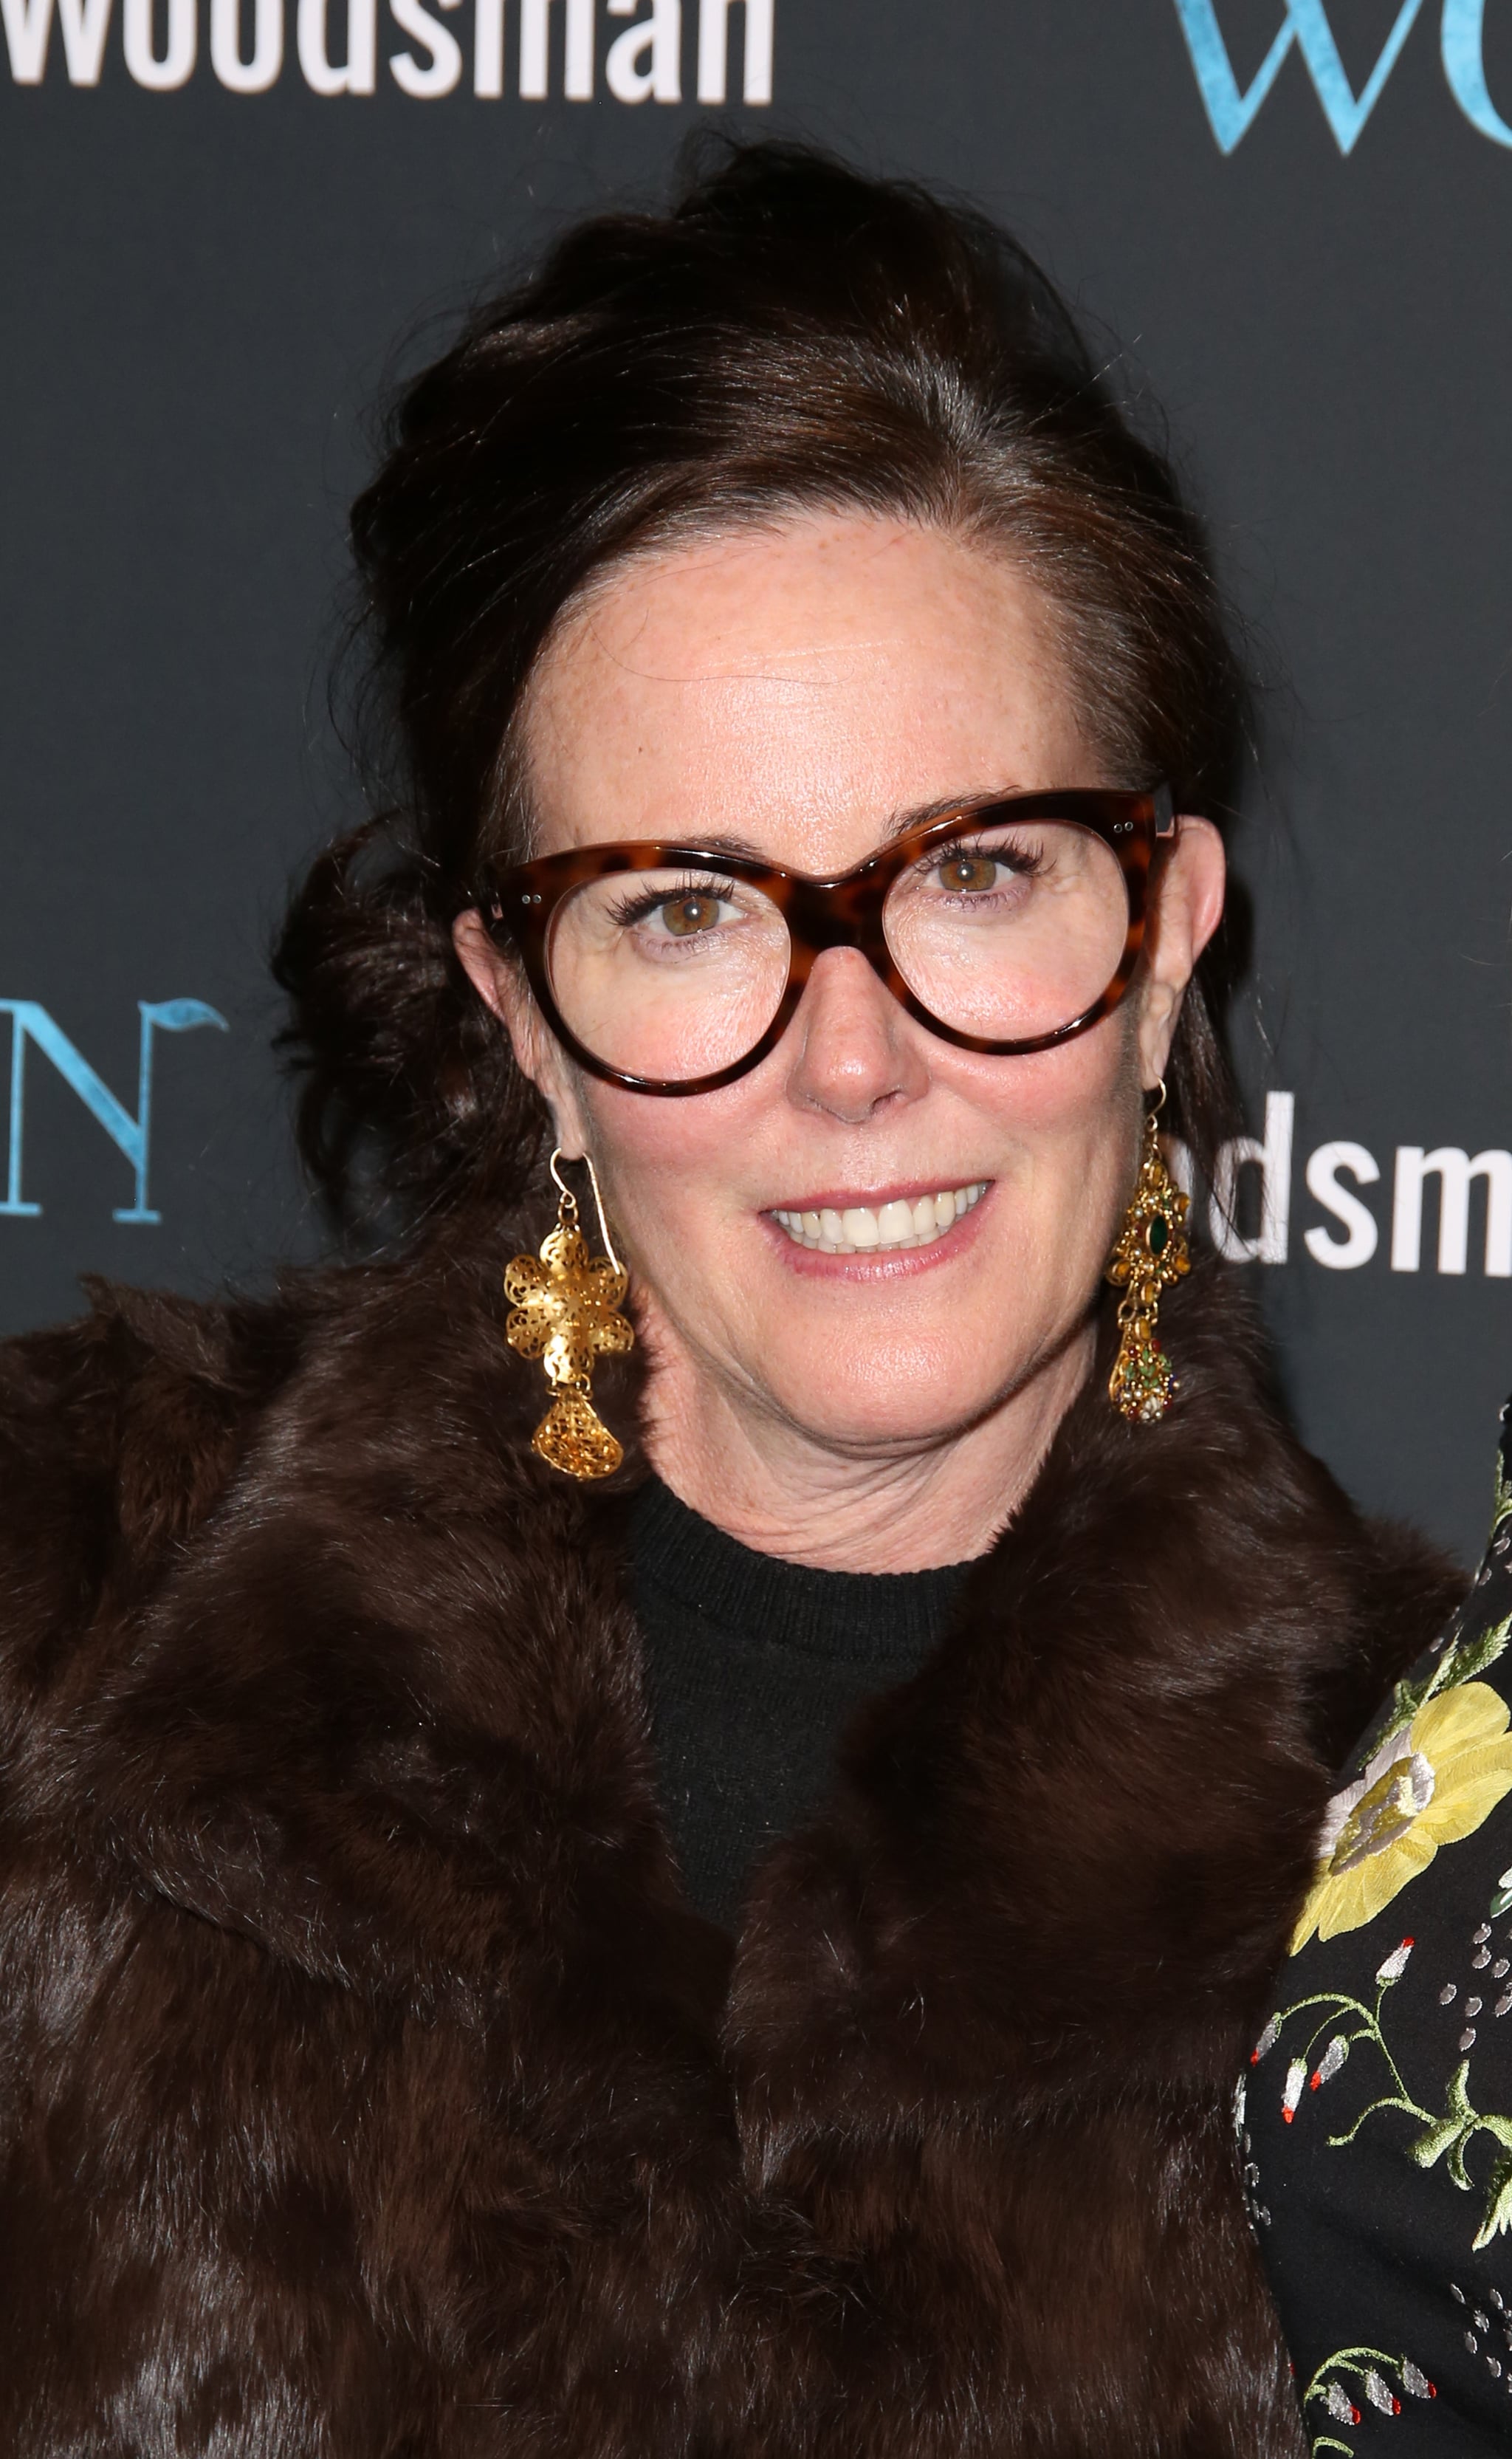 NEW YORK, NY - FEBRUARY 08:  Kate Spade attends the Off-Broadway Opening Night Performance of 'The Woodsman' at The New World Stages on February 8, 2016 in New York City.  (Photo by Walter McBride/Getty Images)